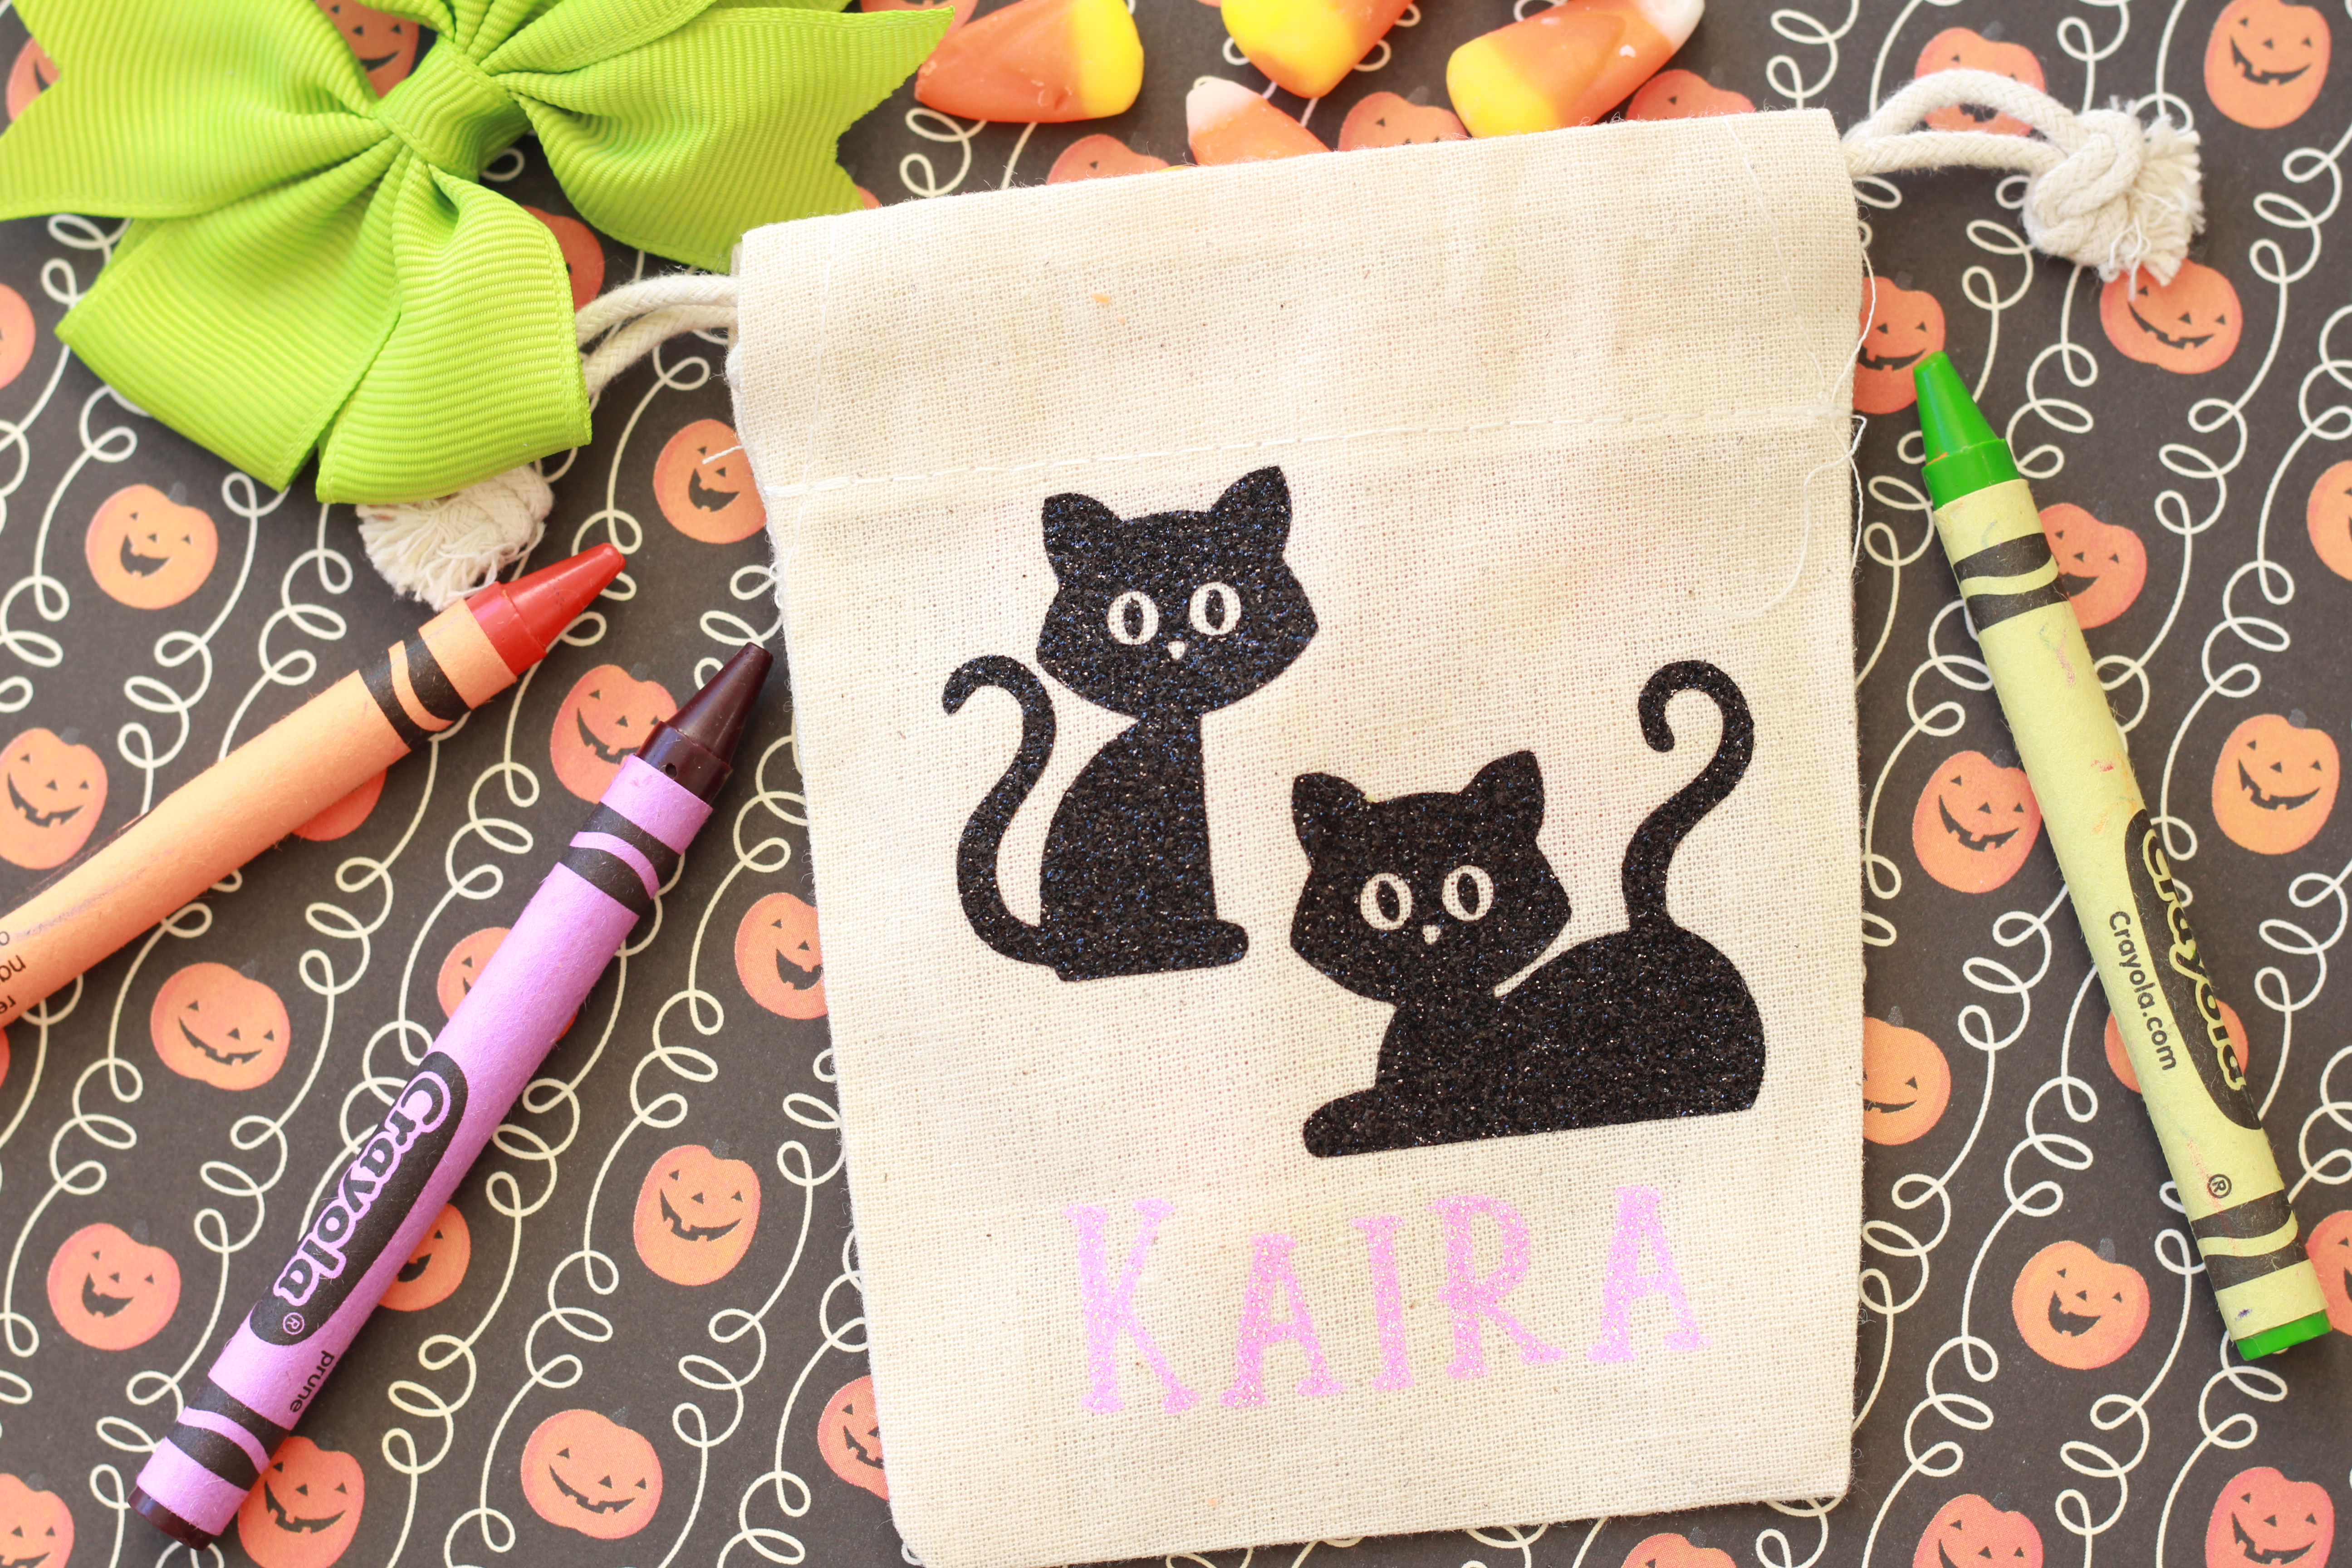 Halloween goodie bag with black cats and glitter heat transfer vinyl